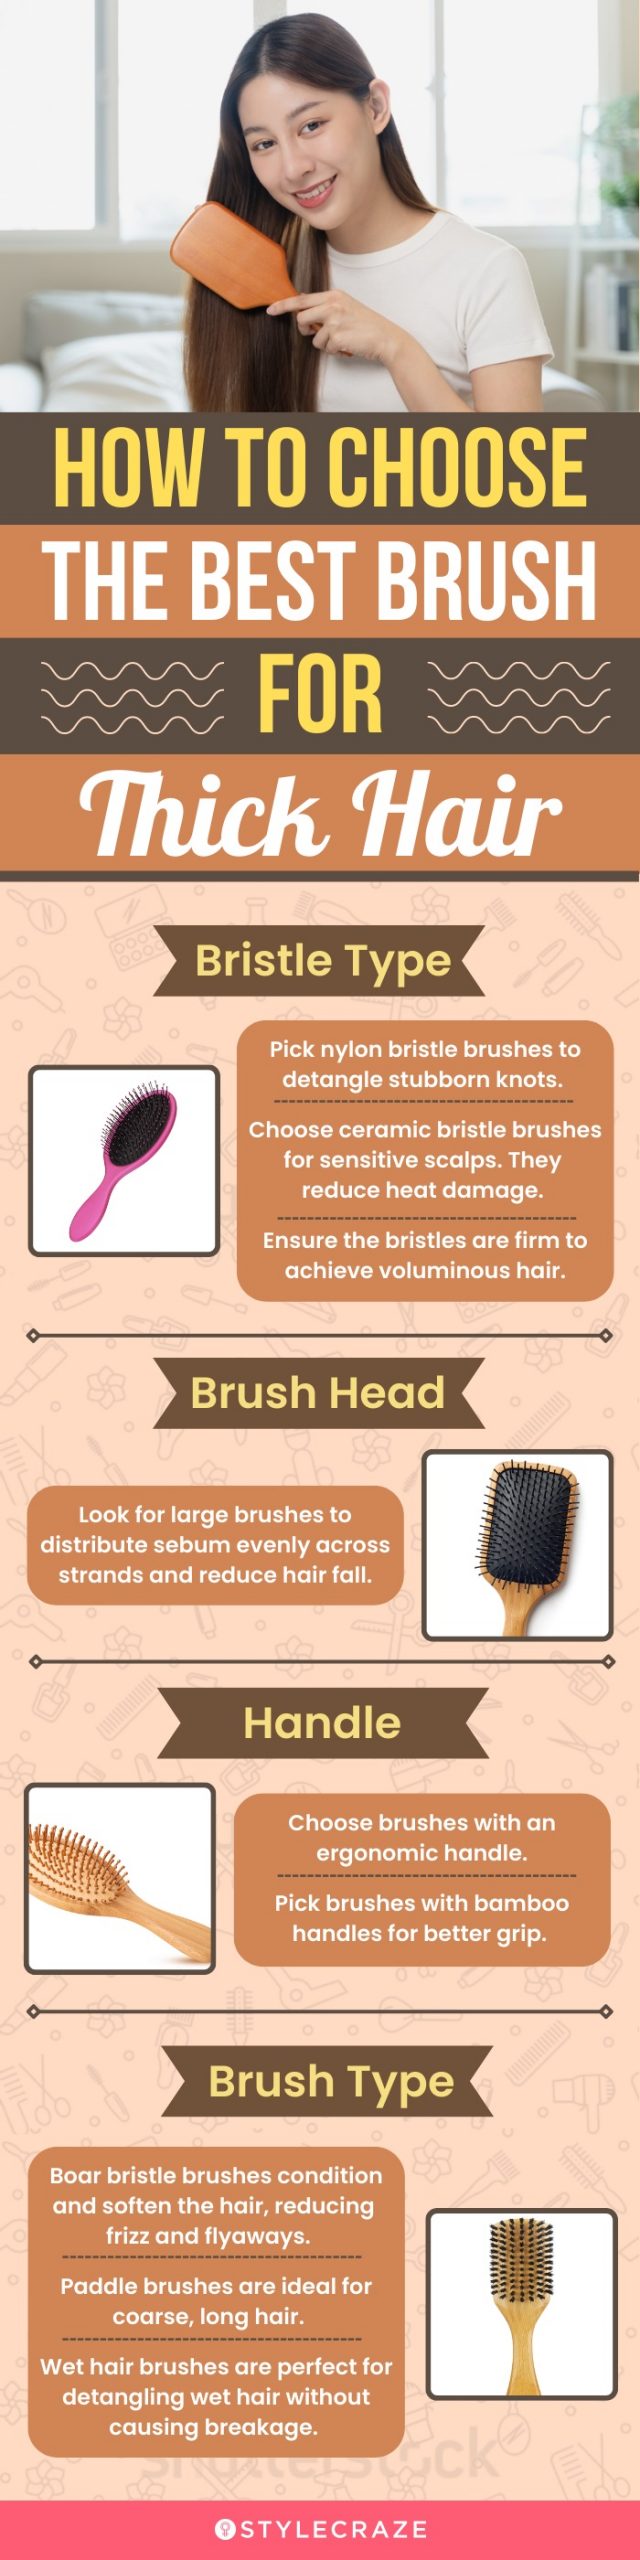  How To Choose The Best Brush For Thick Hair(infographic) 